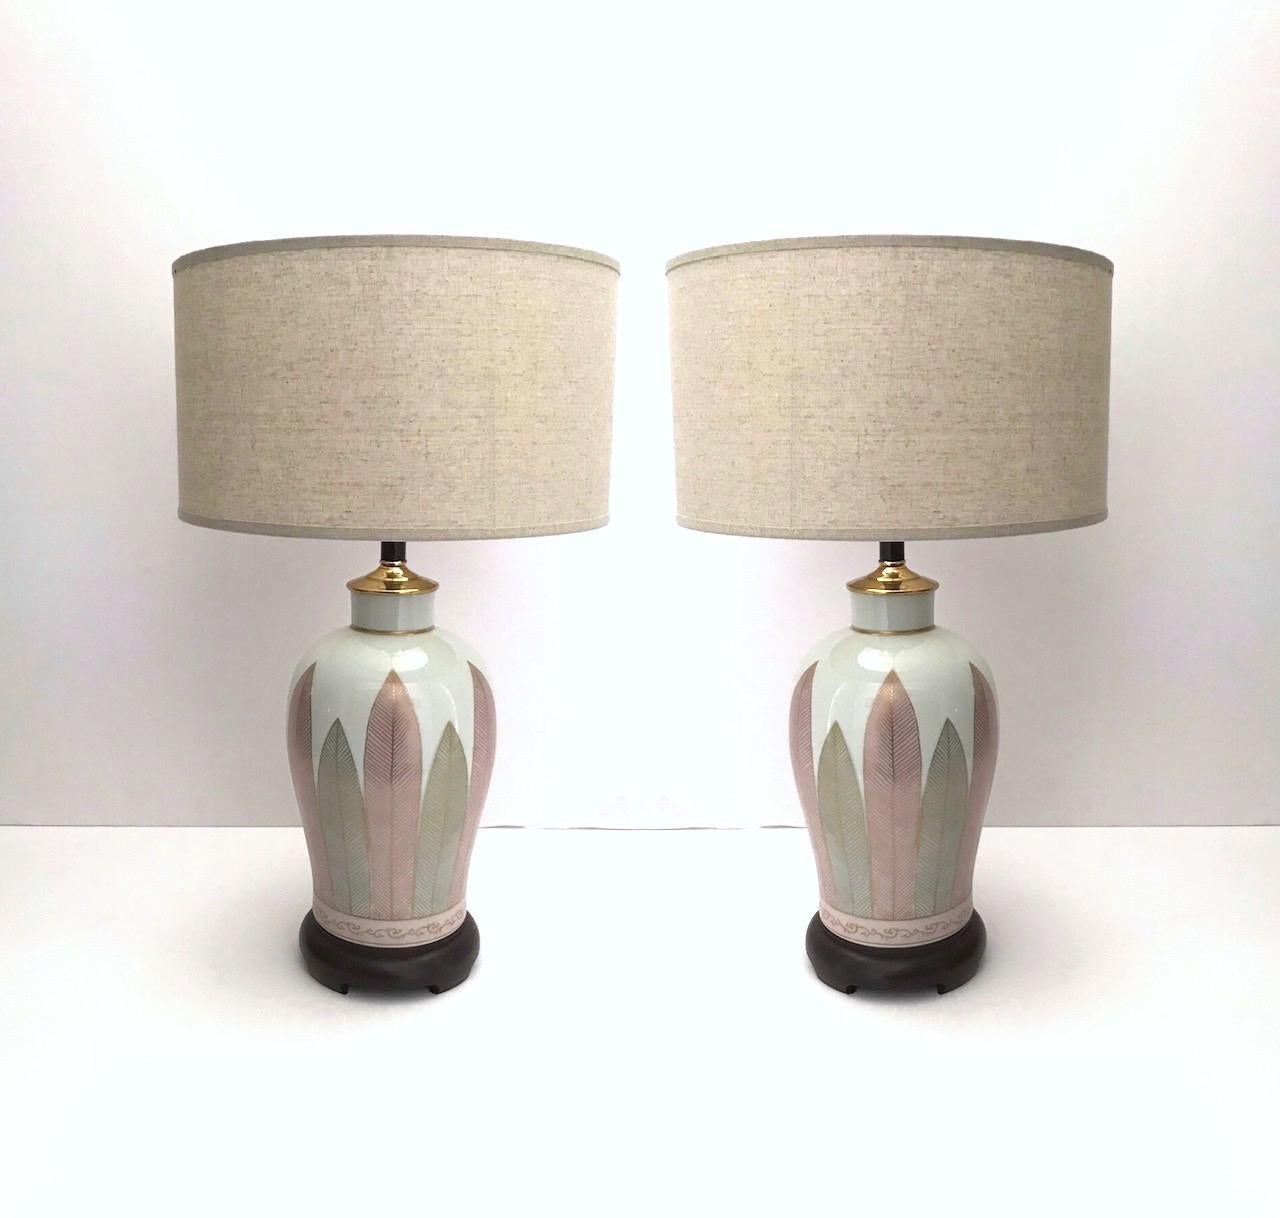 Exquisite pair of Mid-Century Modern Japanese porcelain lamps with white crackle glaze finish. Lamps have elegant urn forms with hand painted leaves in alternating hues of pink and grey, and outlined in 22-karat gold leaf. The hand-applied gold is